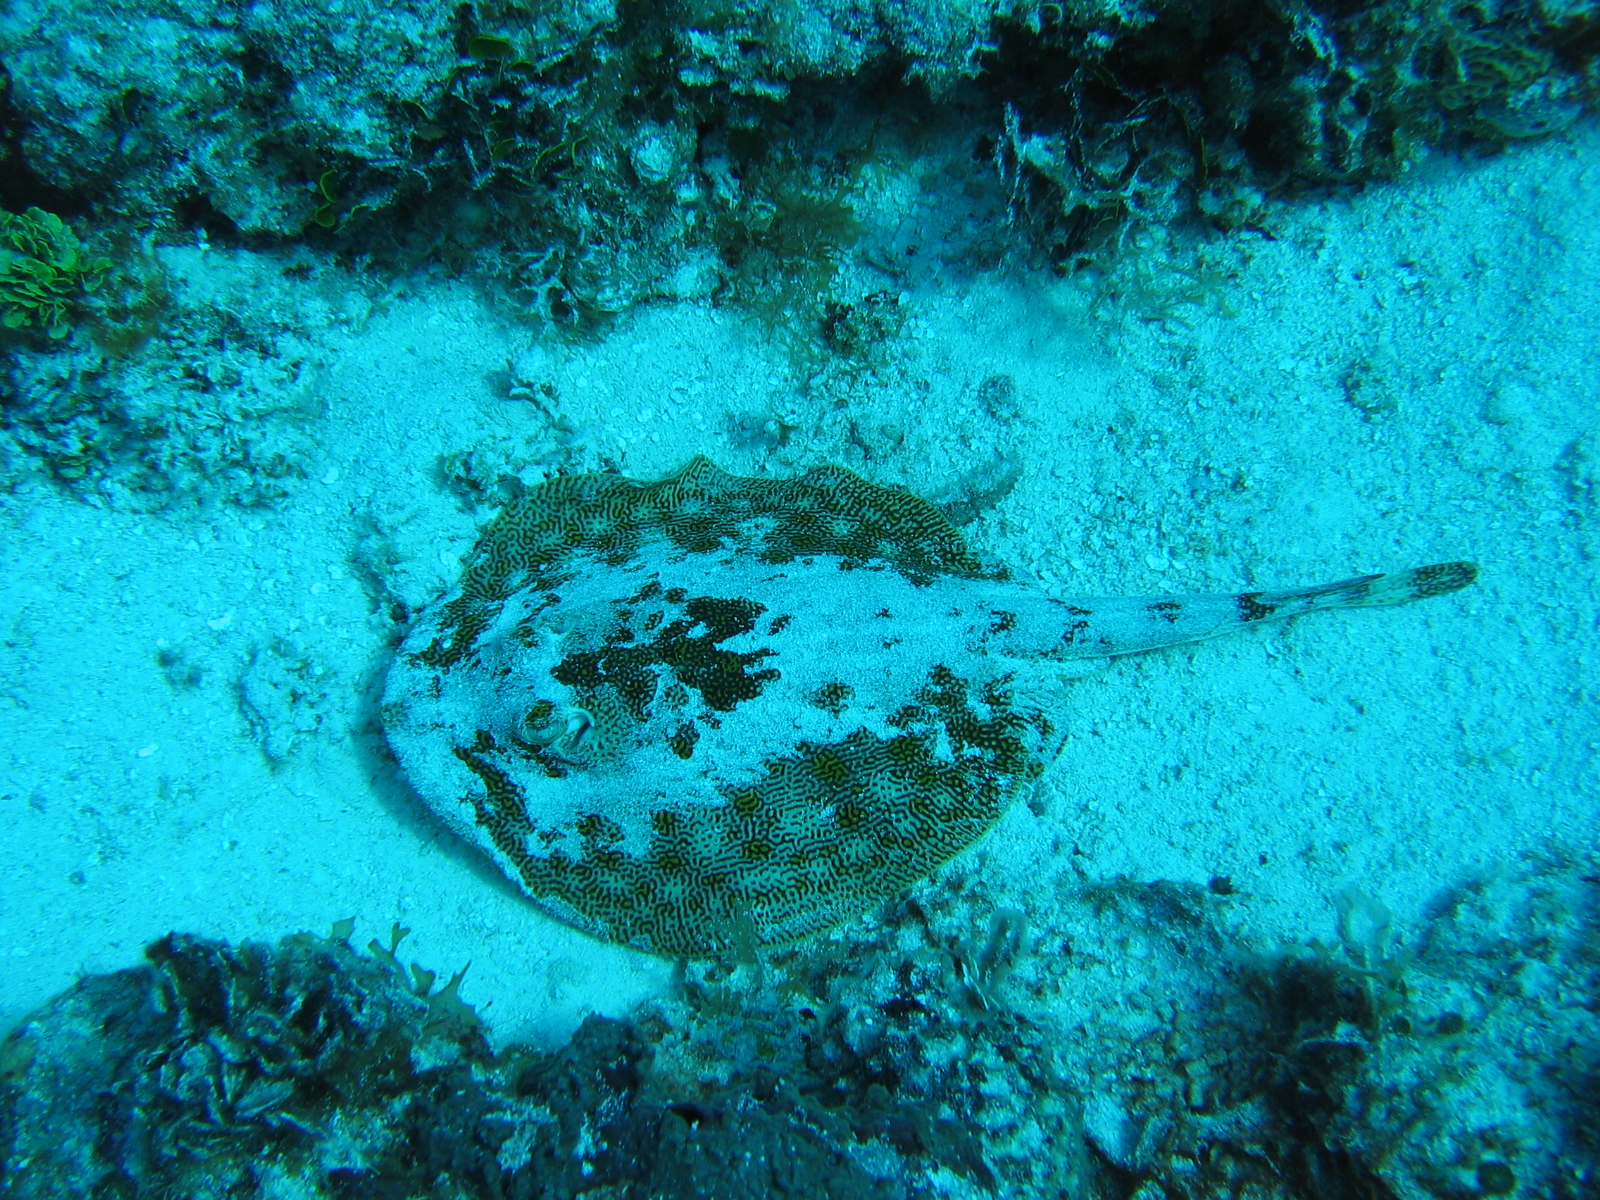 Spotted stingray